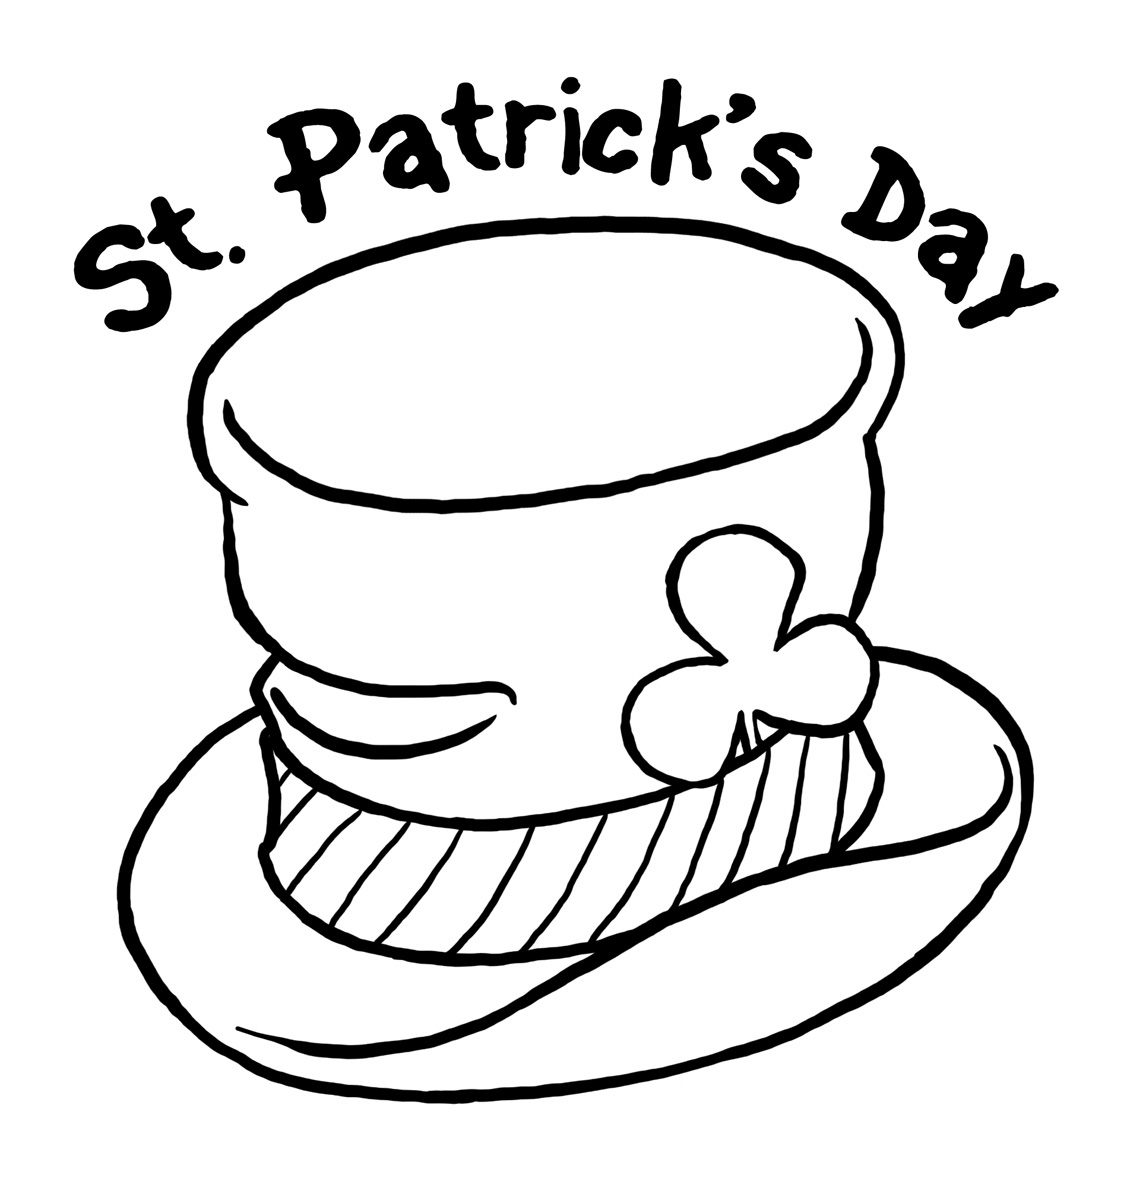 Printable st Patricks Day Coloring PagesTaiwanhydrogen.org | Free 